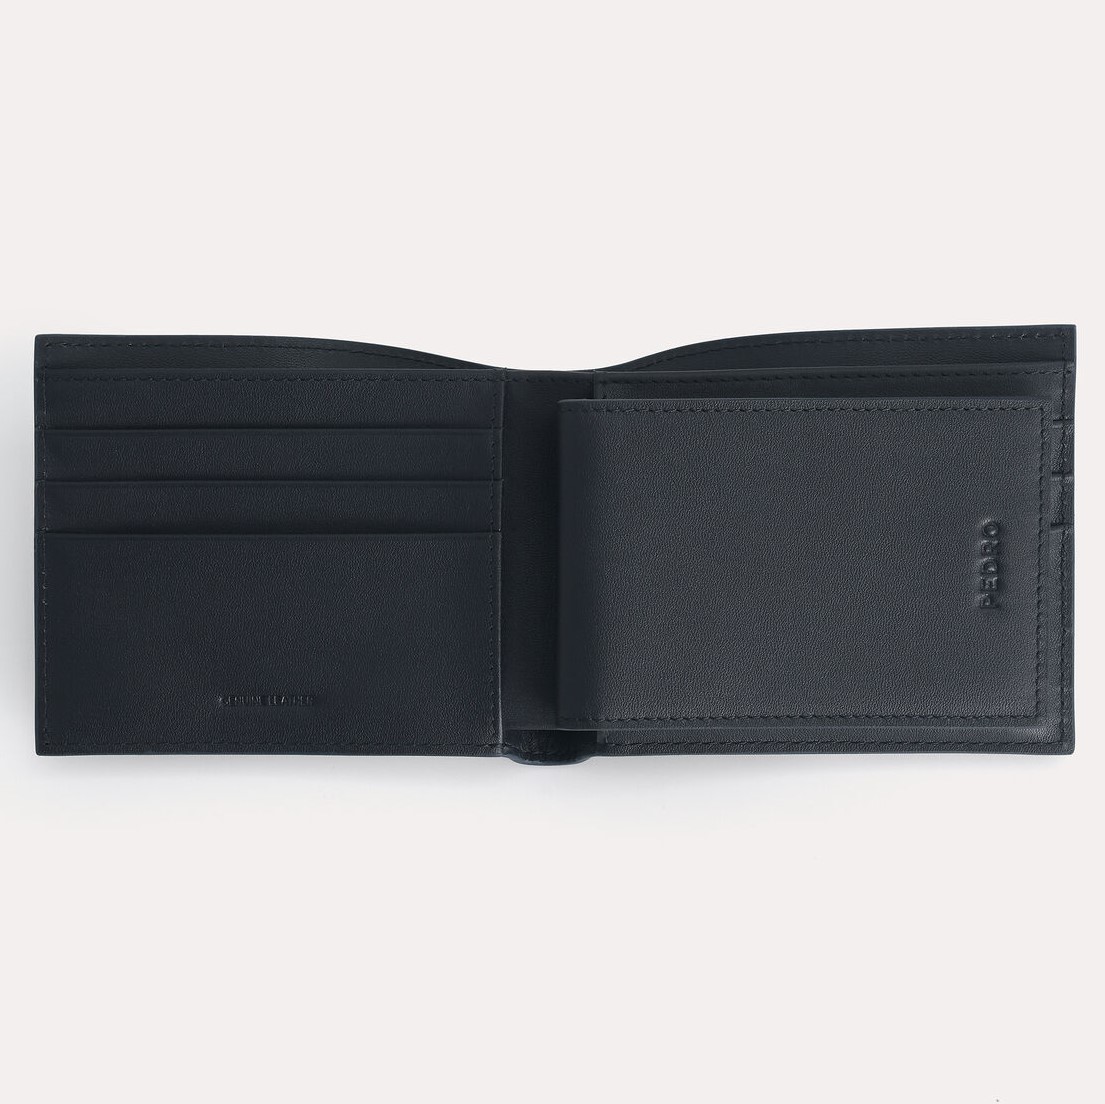 VÍ PEDRO TEXTURED LEATHER BI-FOLD WALLET WITH INSERT 6